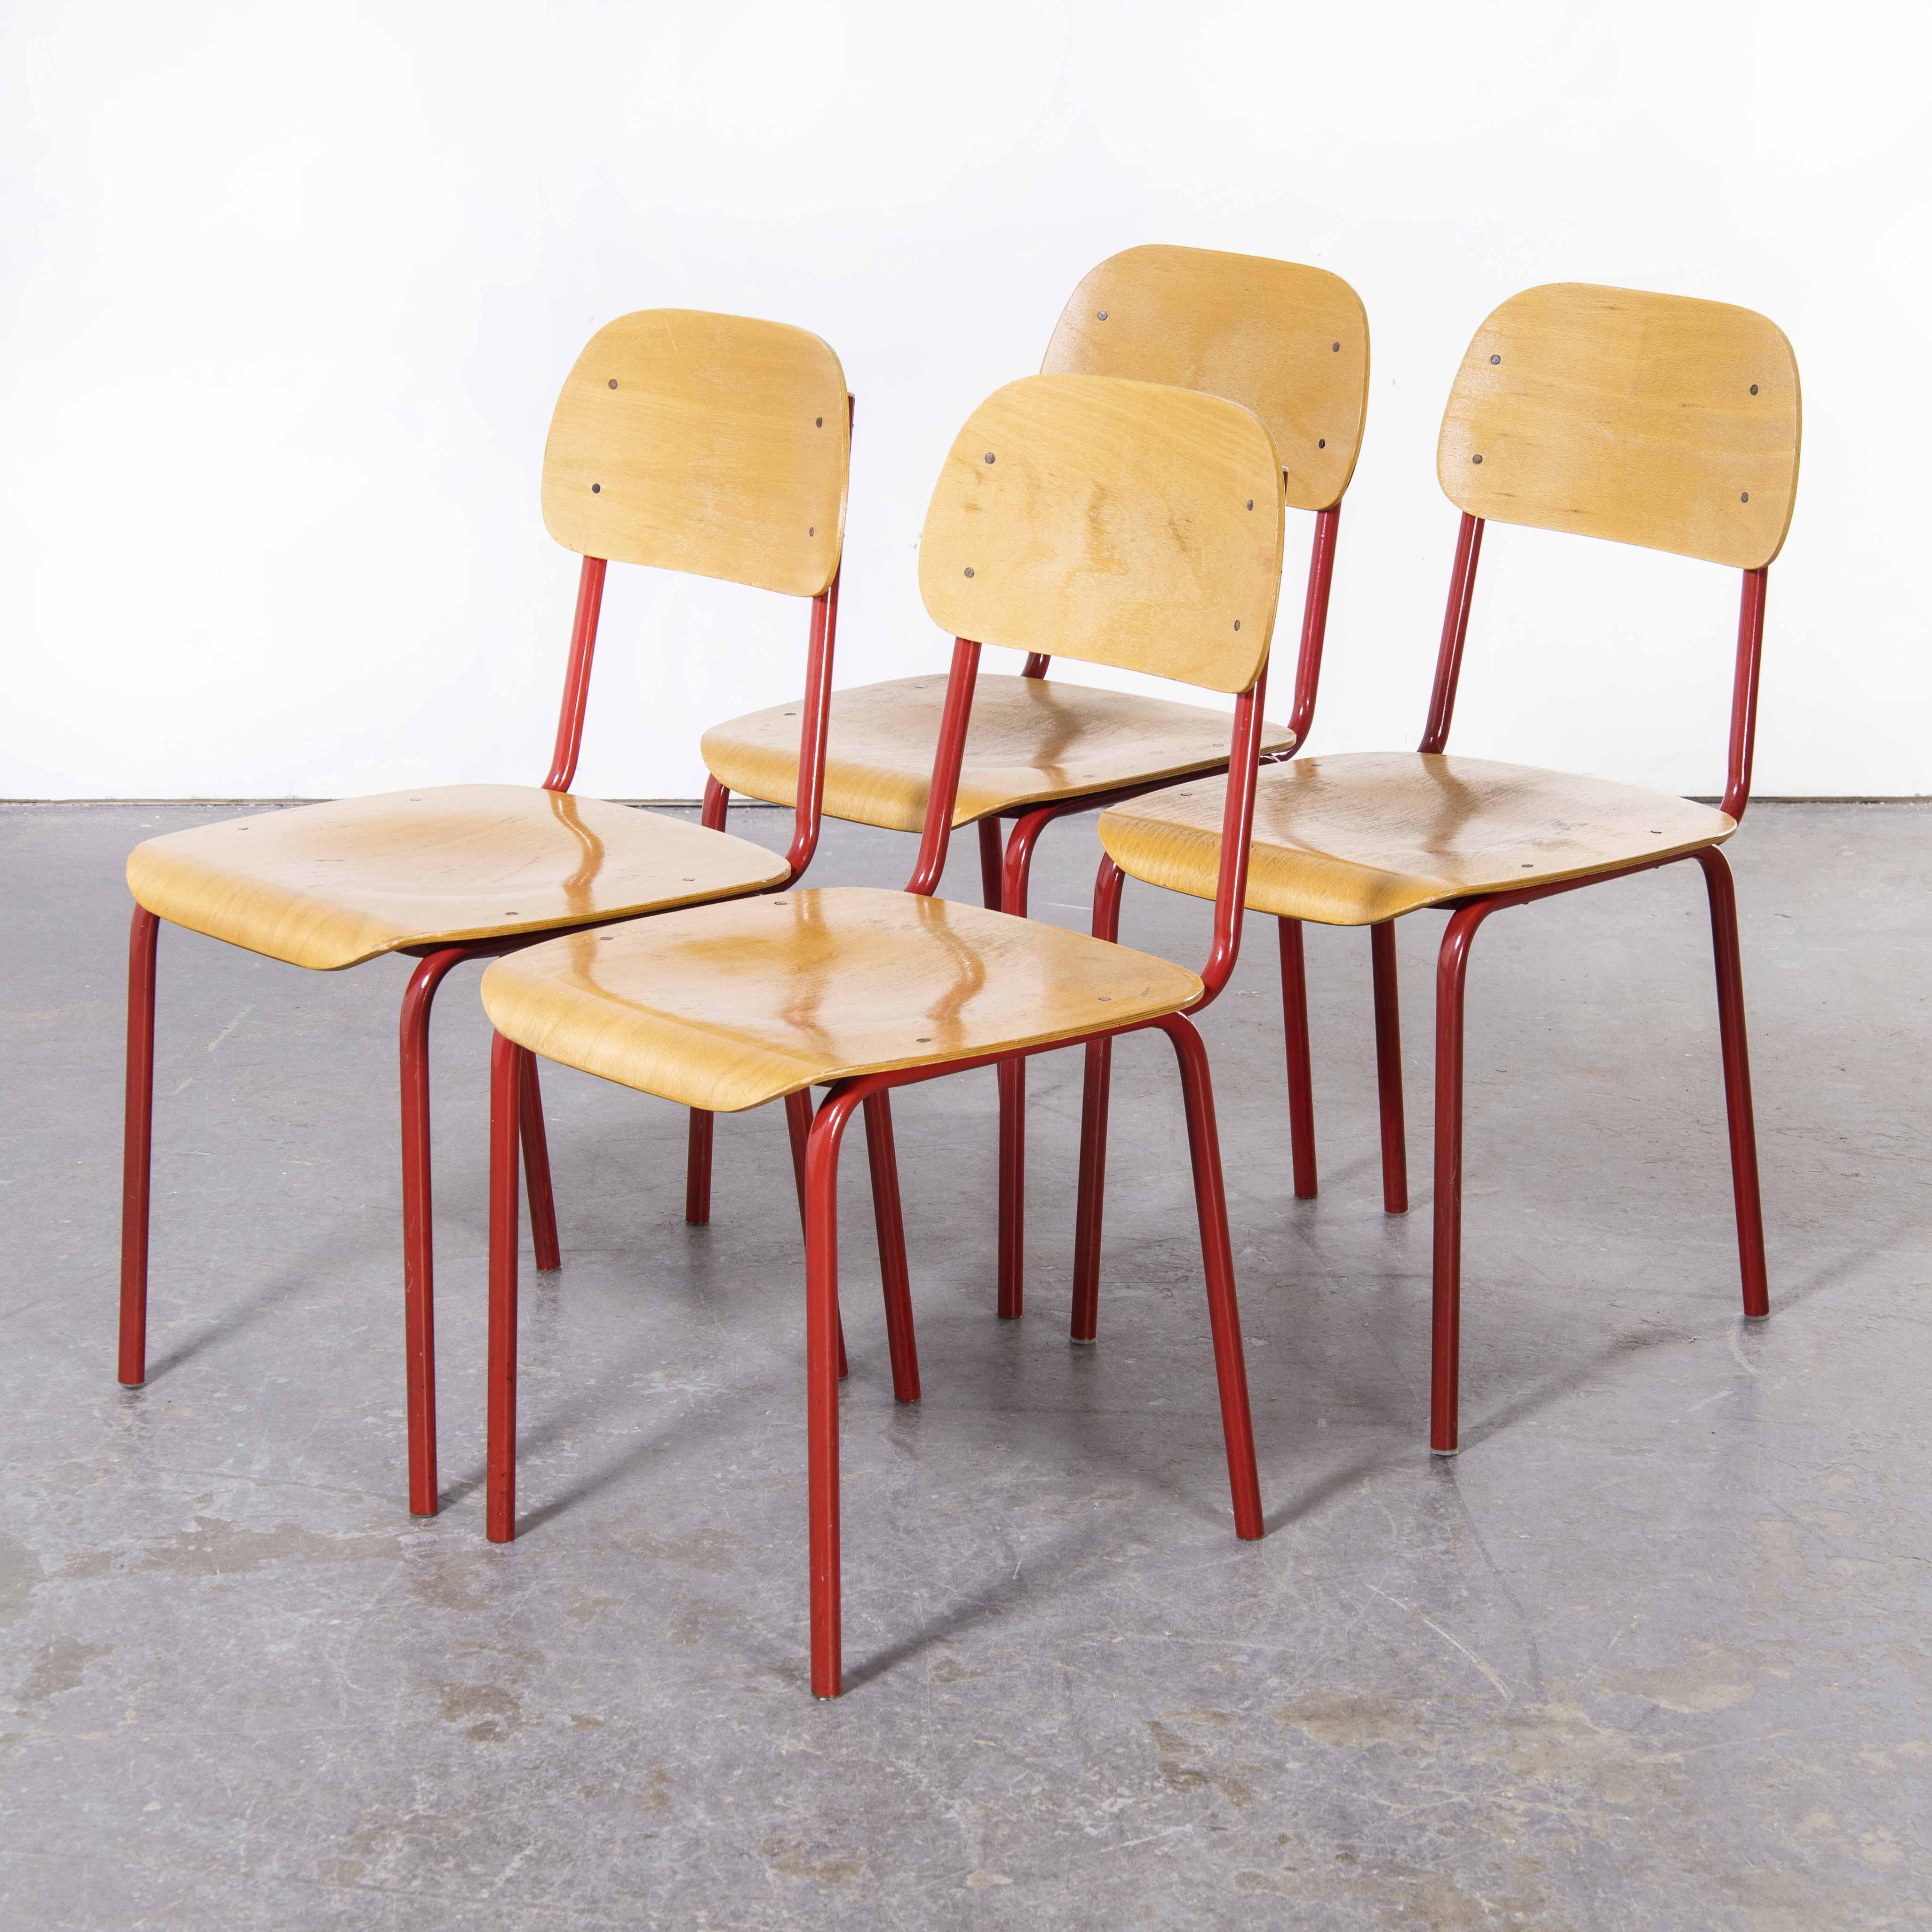 1970's Czech Industrial Stacking Chairs, Red, Set of Four For Sale 5